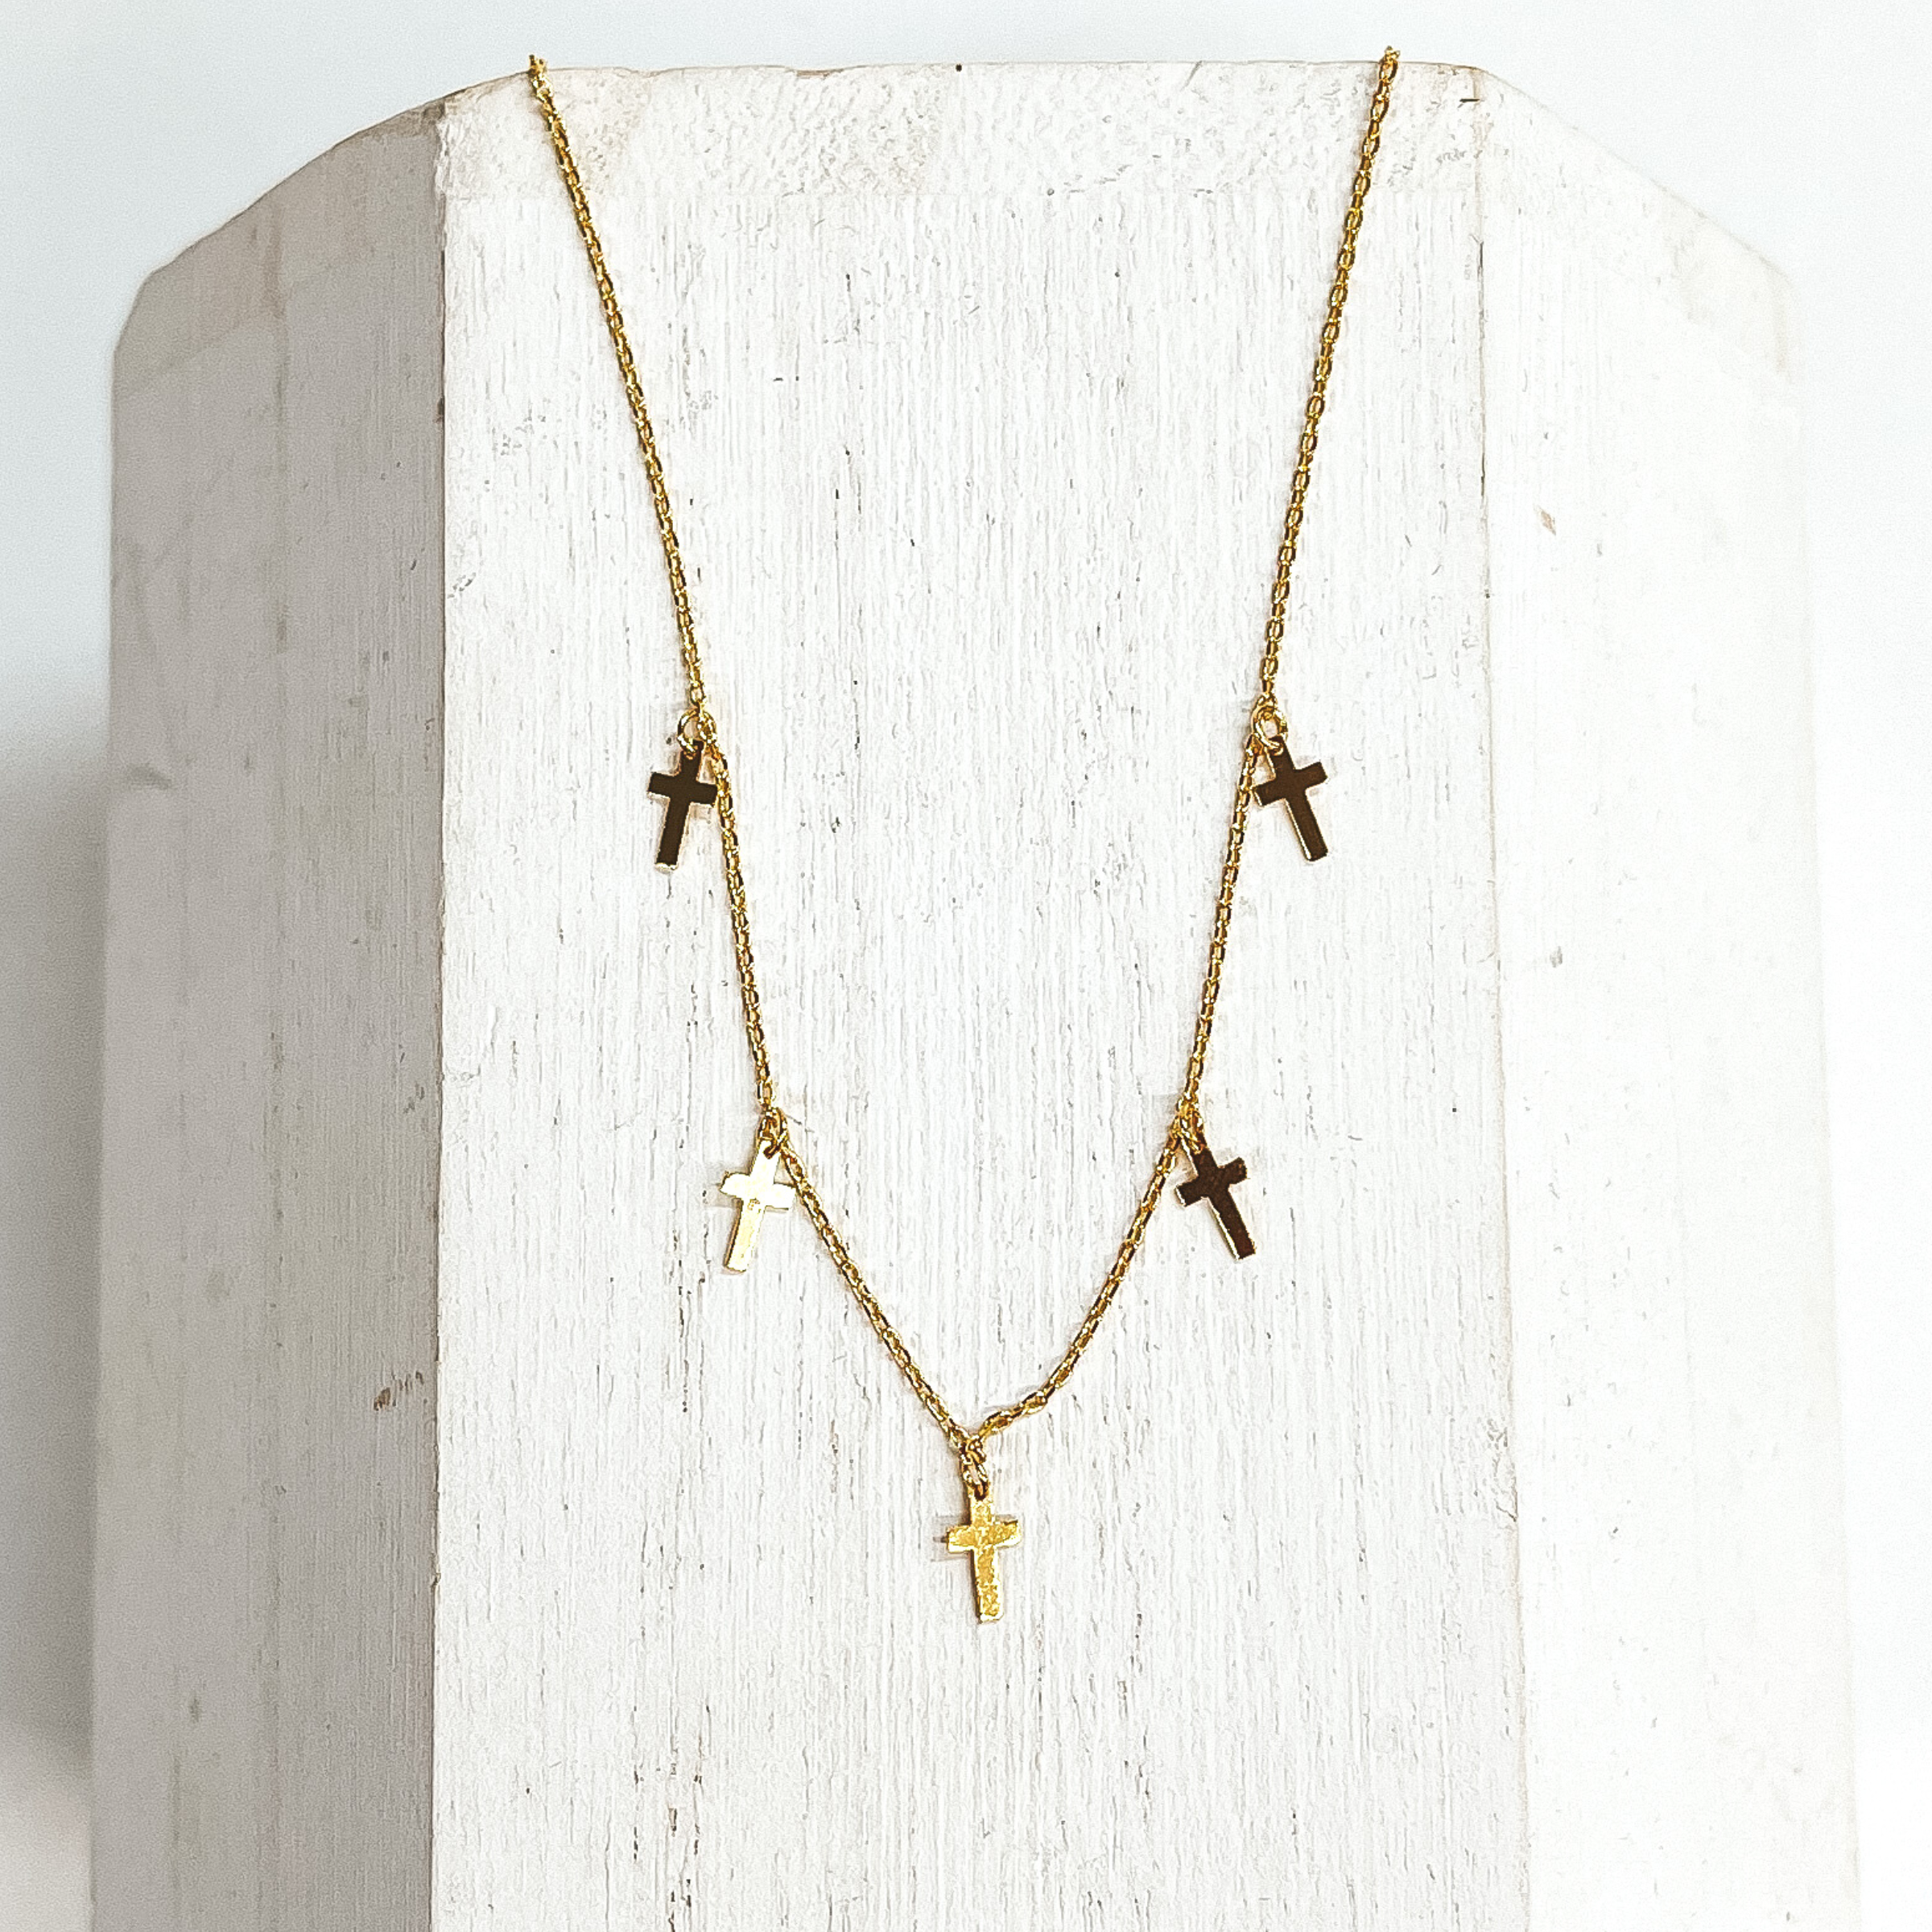 Gold Dipped Dainty Chain Necklace with Cross Charms - Giddy Up Glamour Boutique